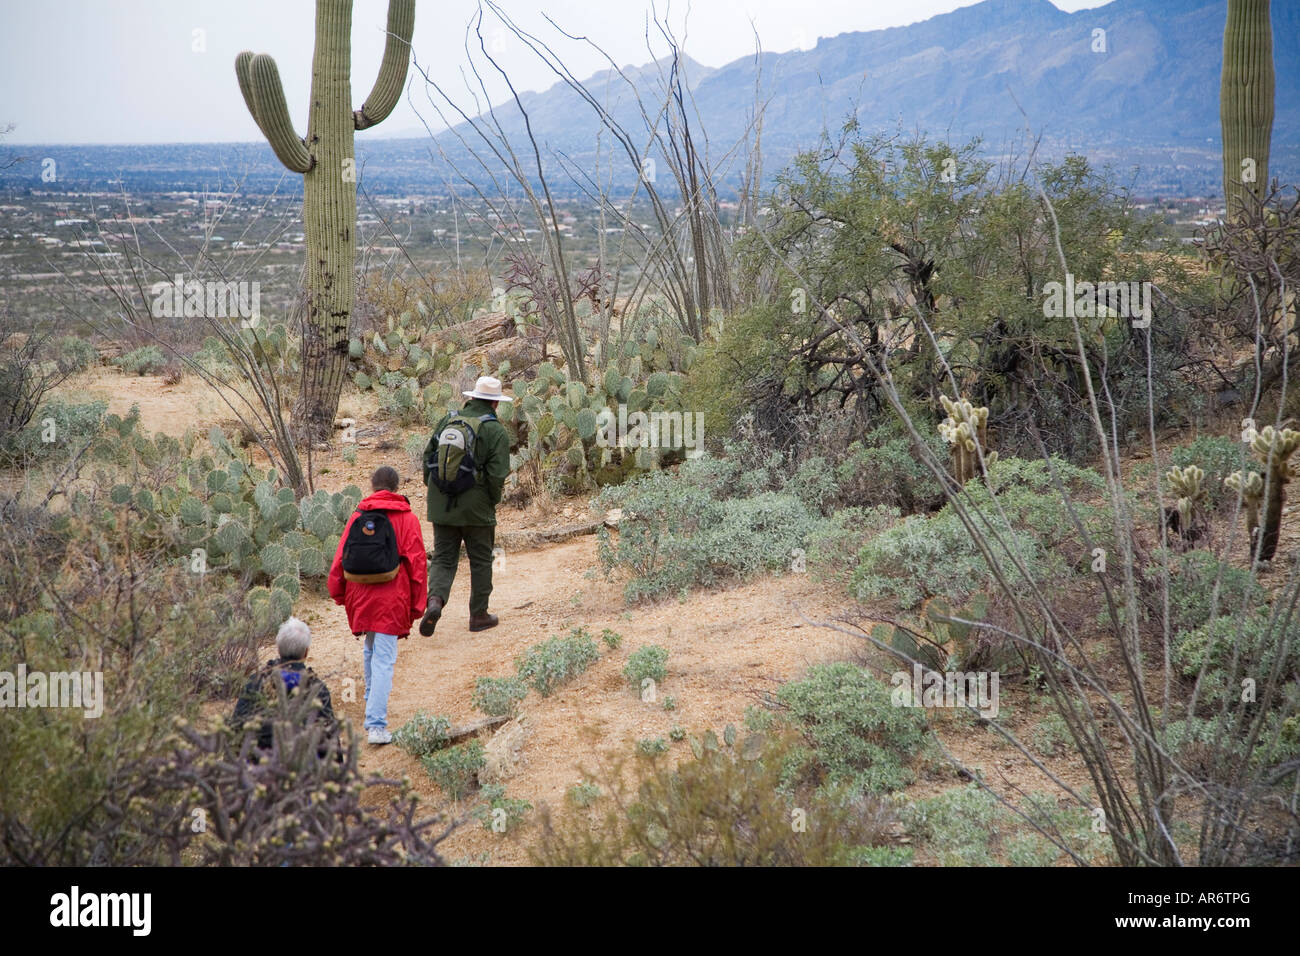 Ranger leads nature hike in Saguaro National Park Stock Photo